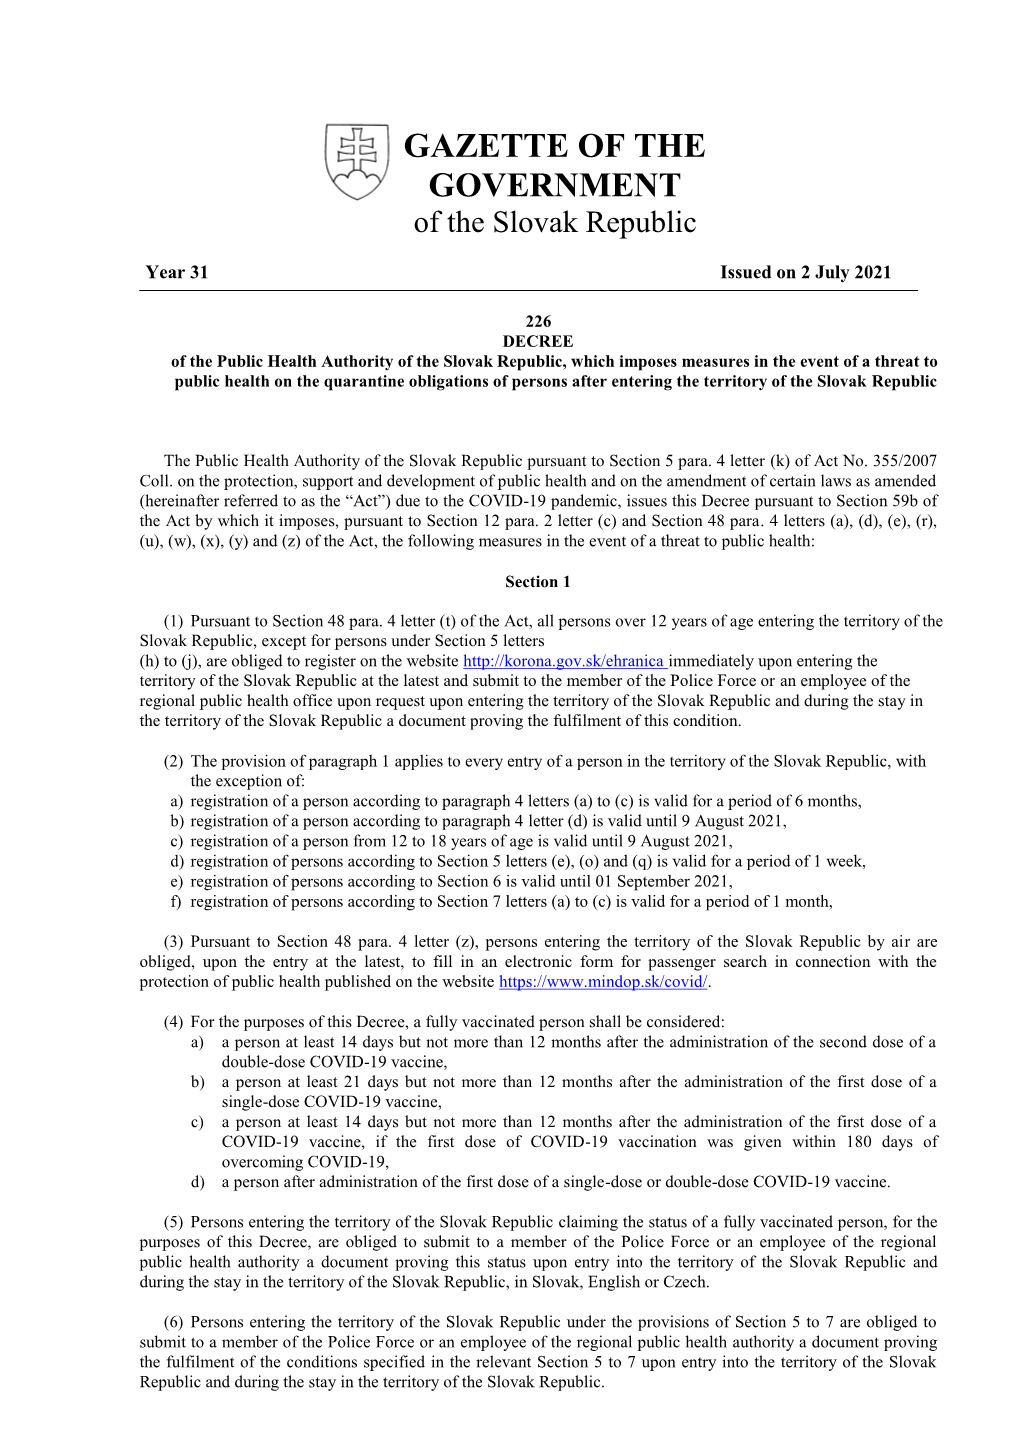 GAZETTE of the GOVERNMENT of the Slovak Republic